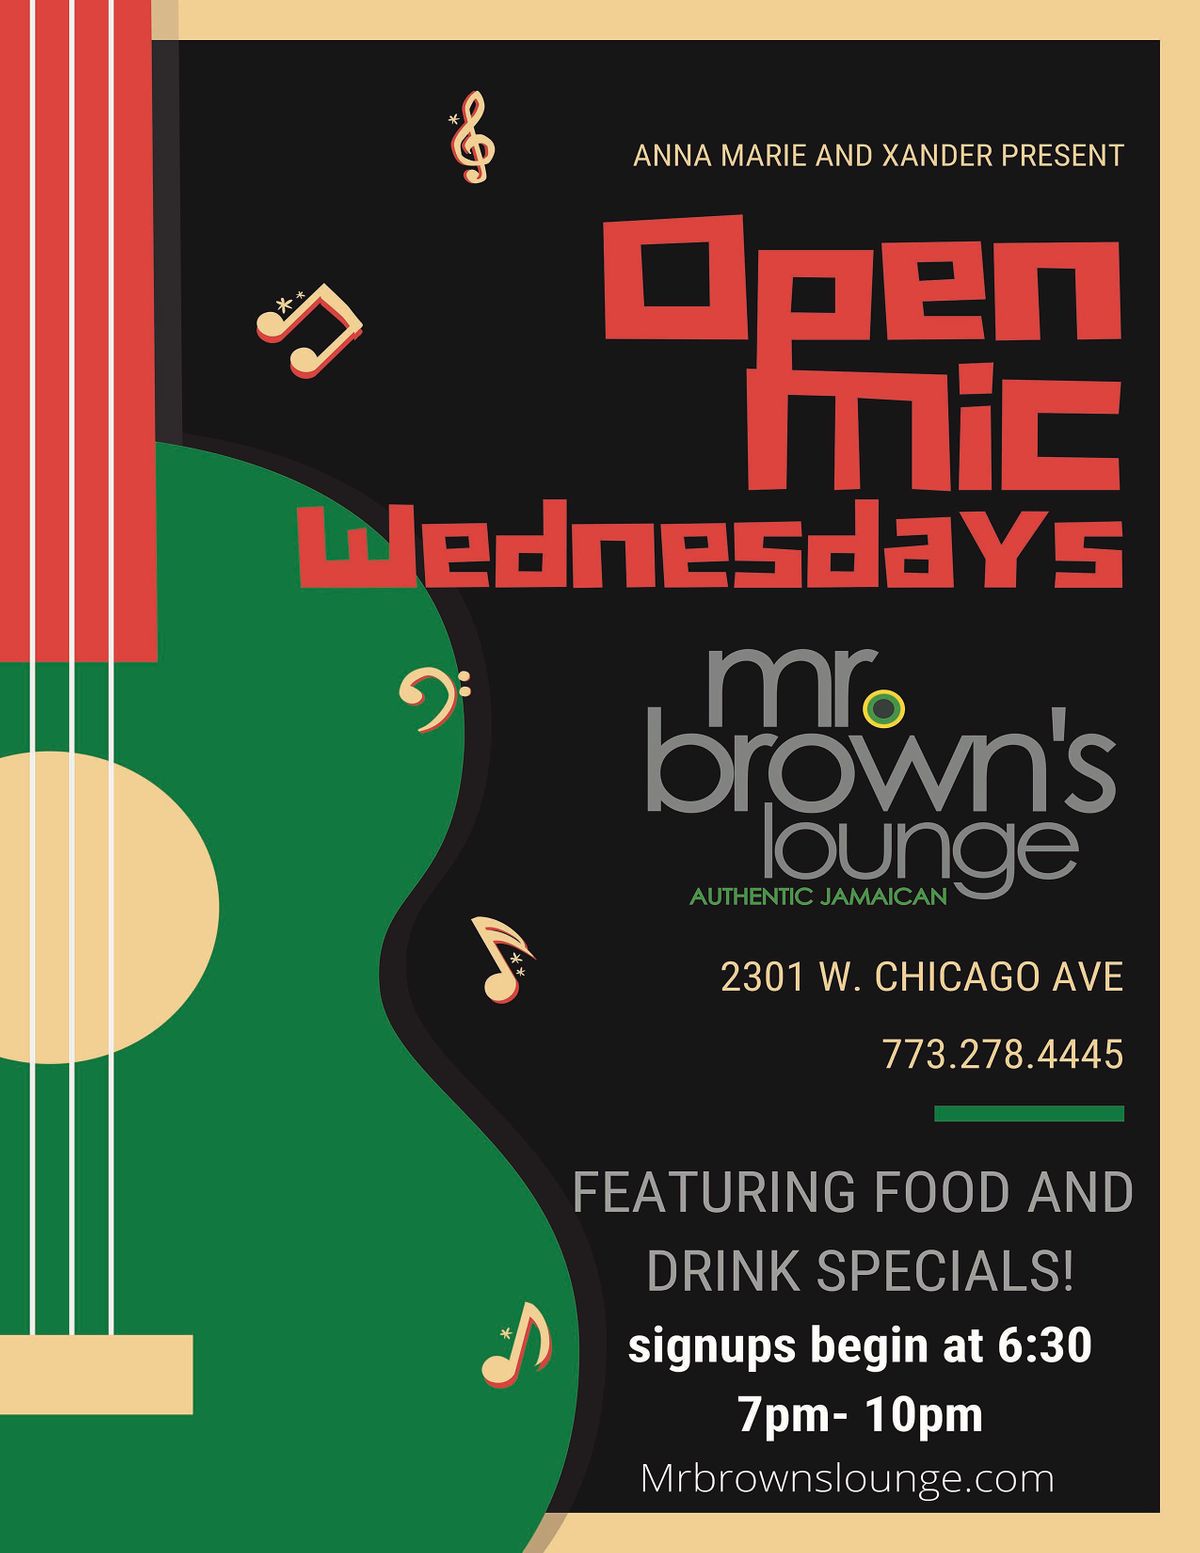 Open Mic Wednesdays at Mr Brown's Lounge hosted by AX Talent!